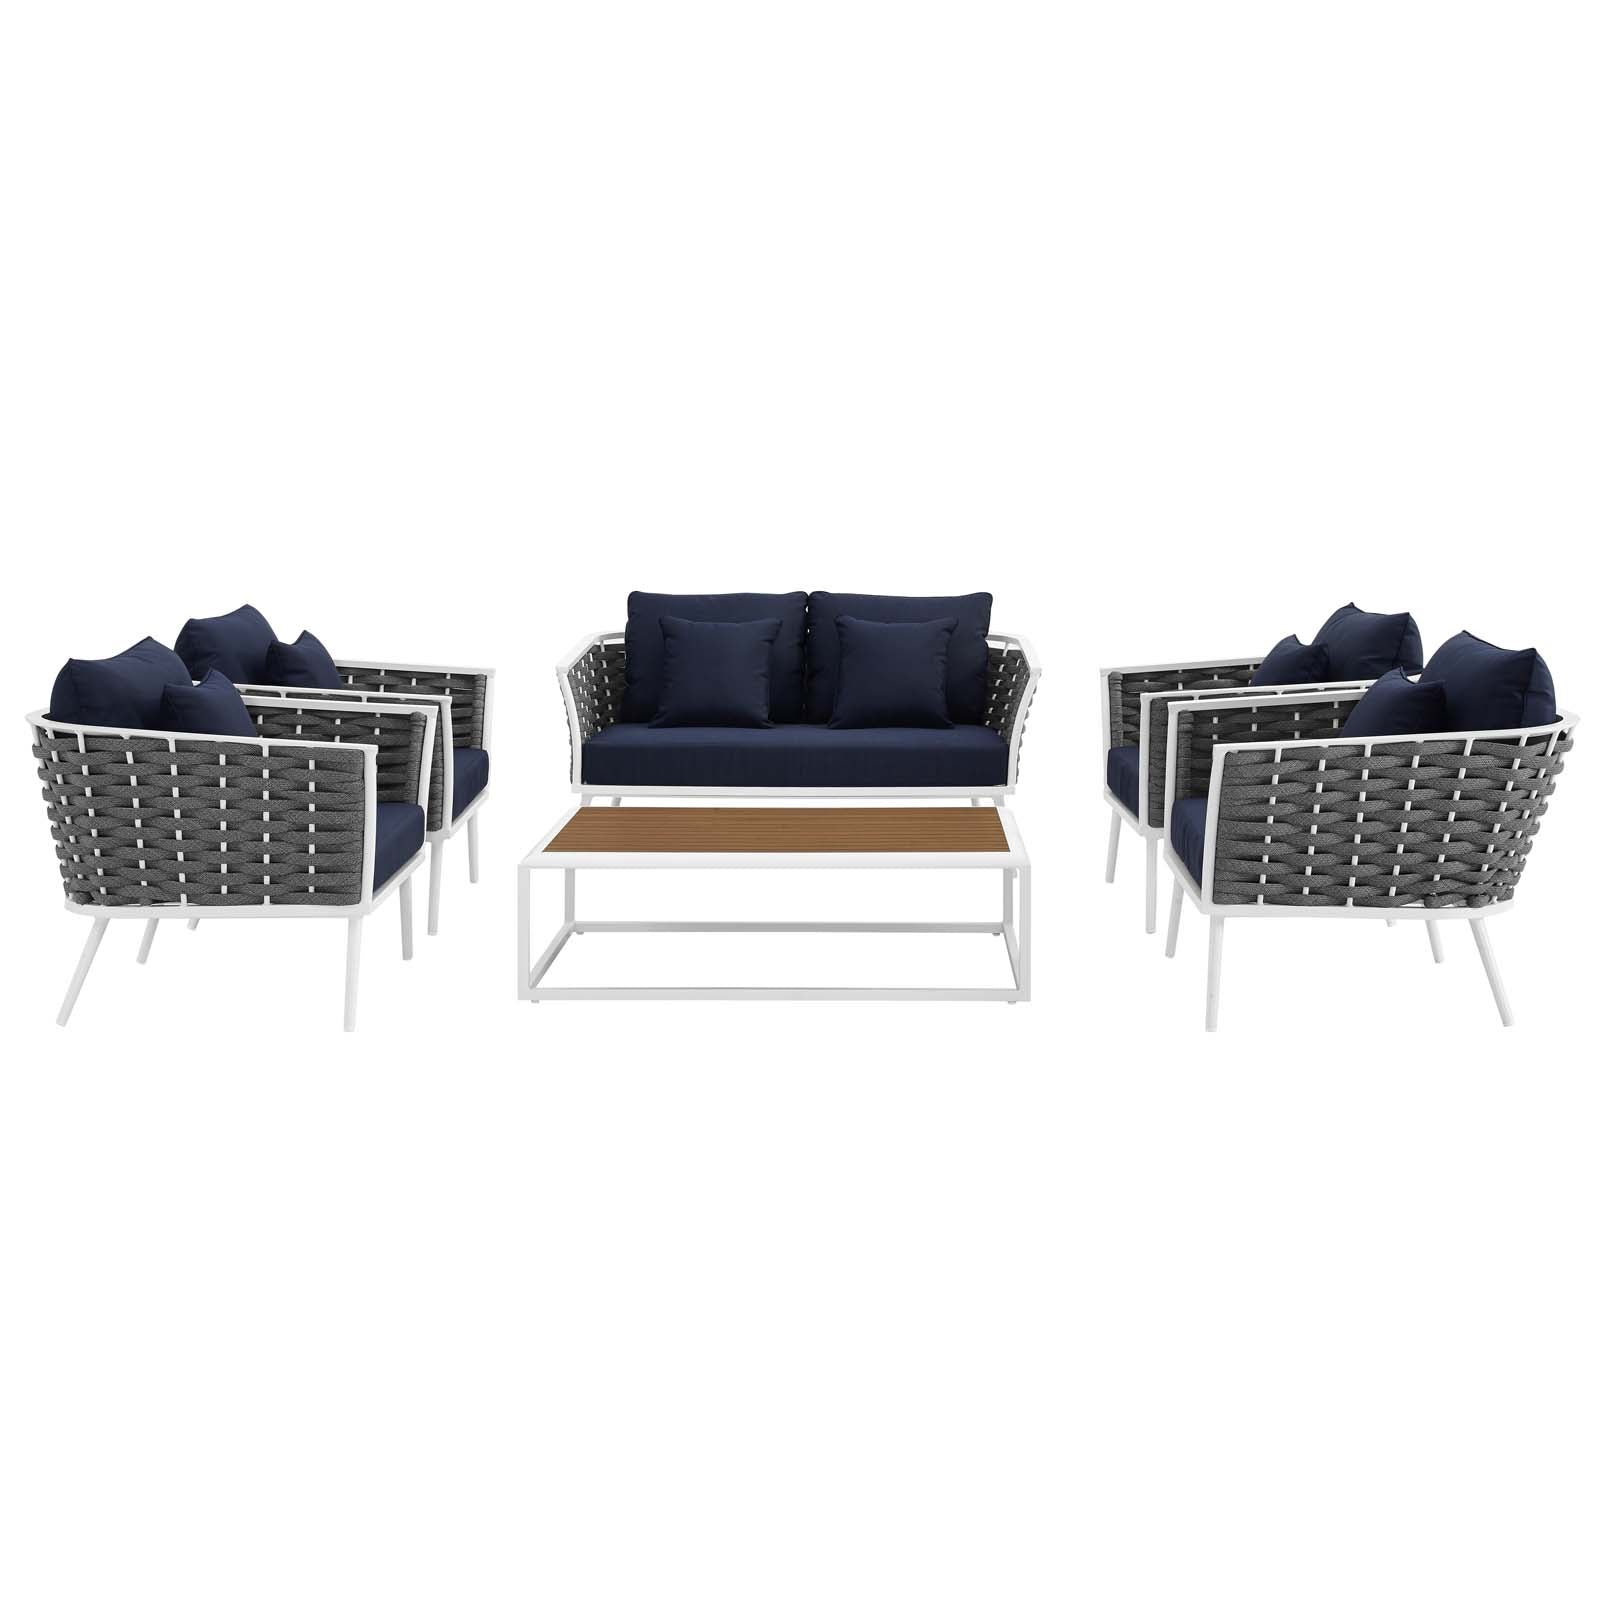 Stance 6 Piece Outdoor 119"W Patio Aluminum Sectional Sofa Set White